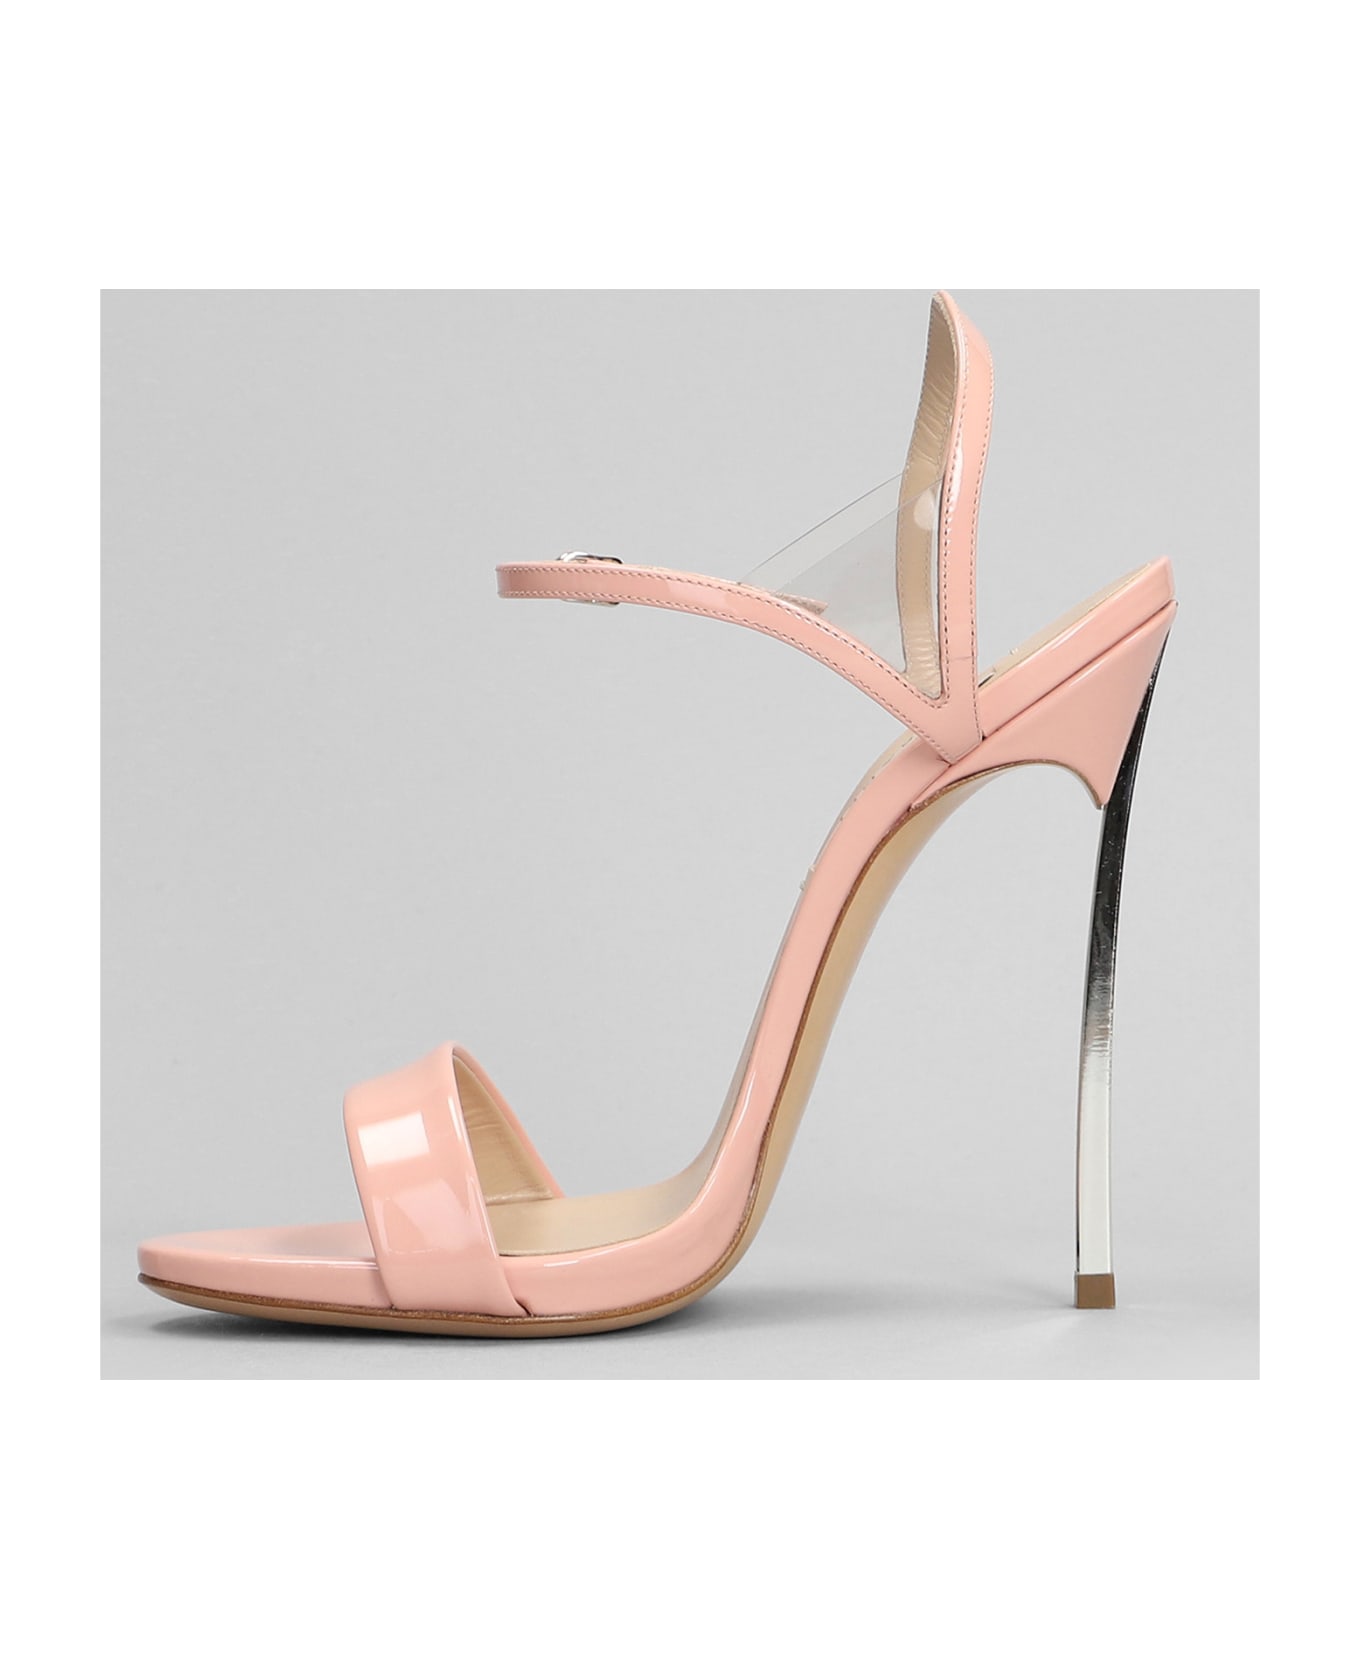 Casadei Sandals In Rose-pink Patent Leather - rose-pink サンダル